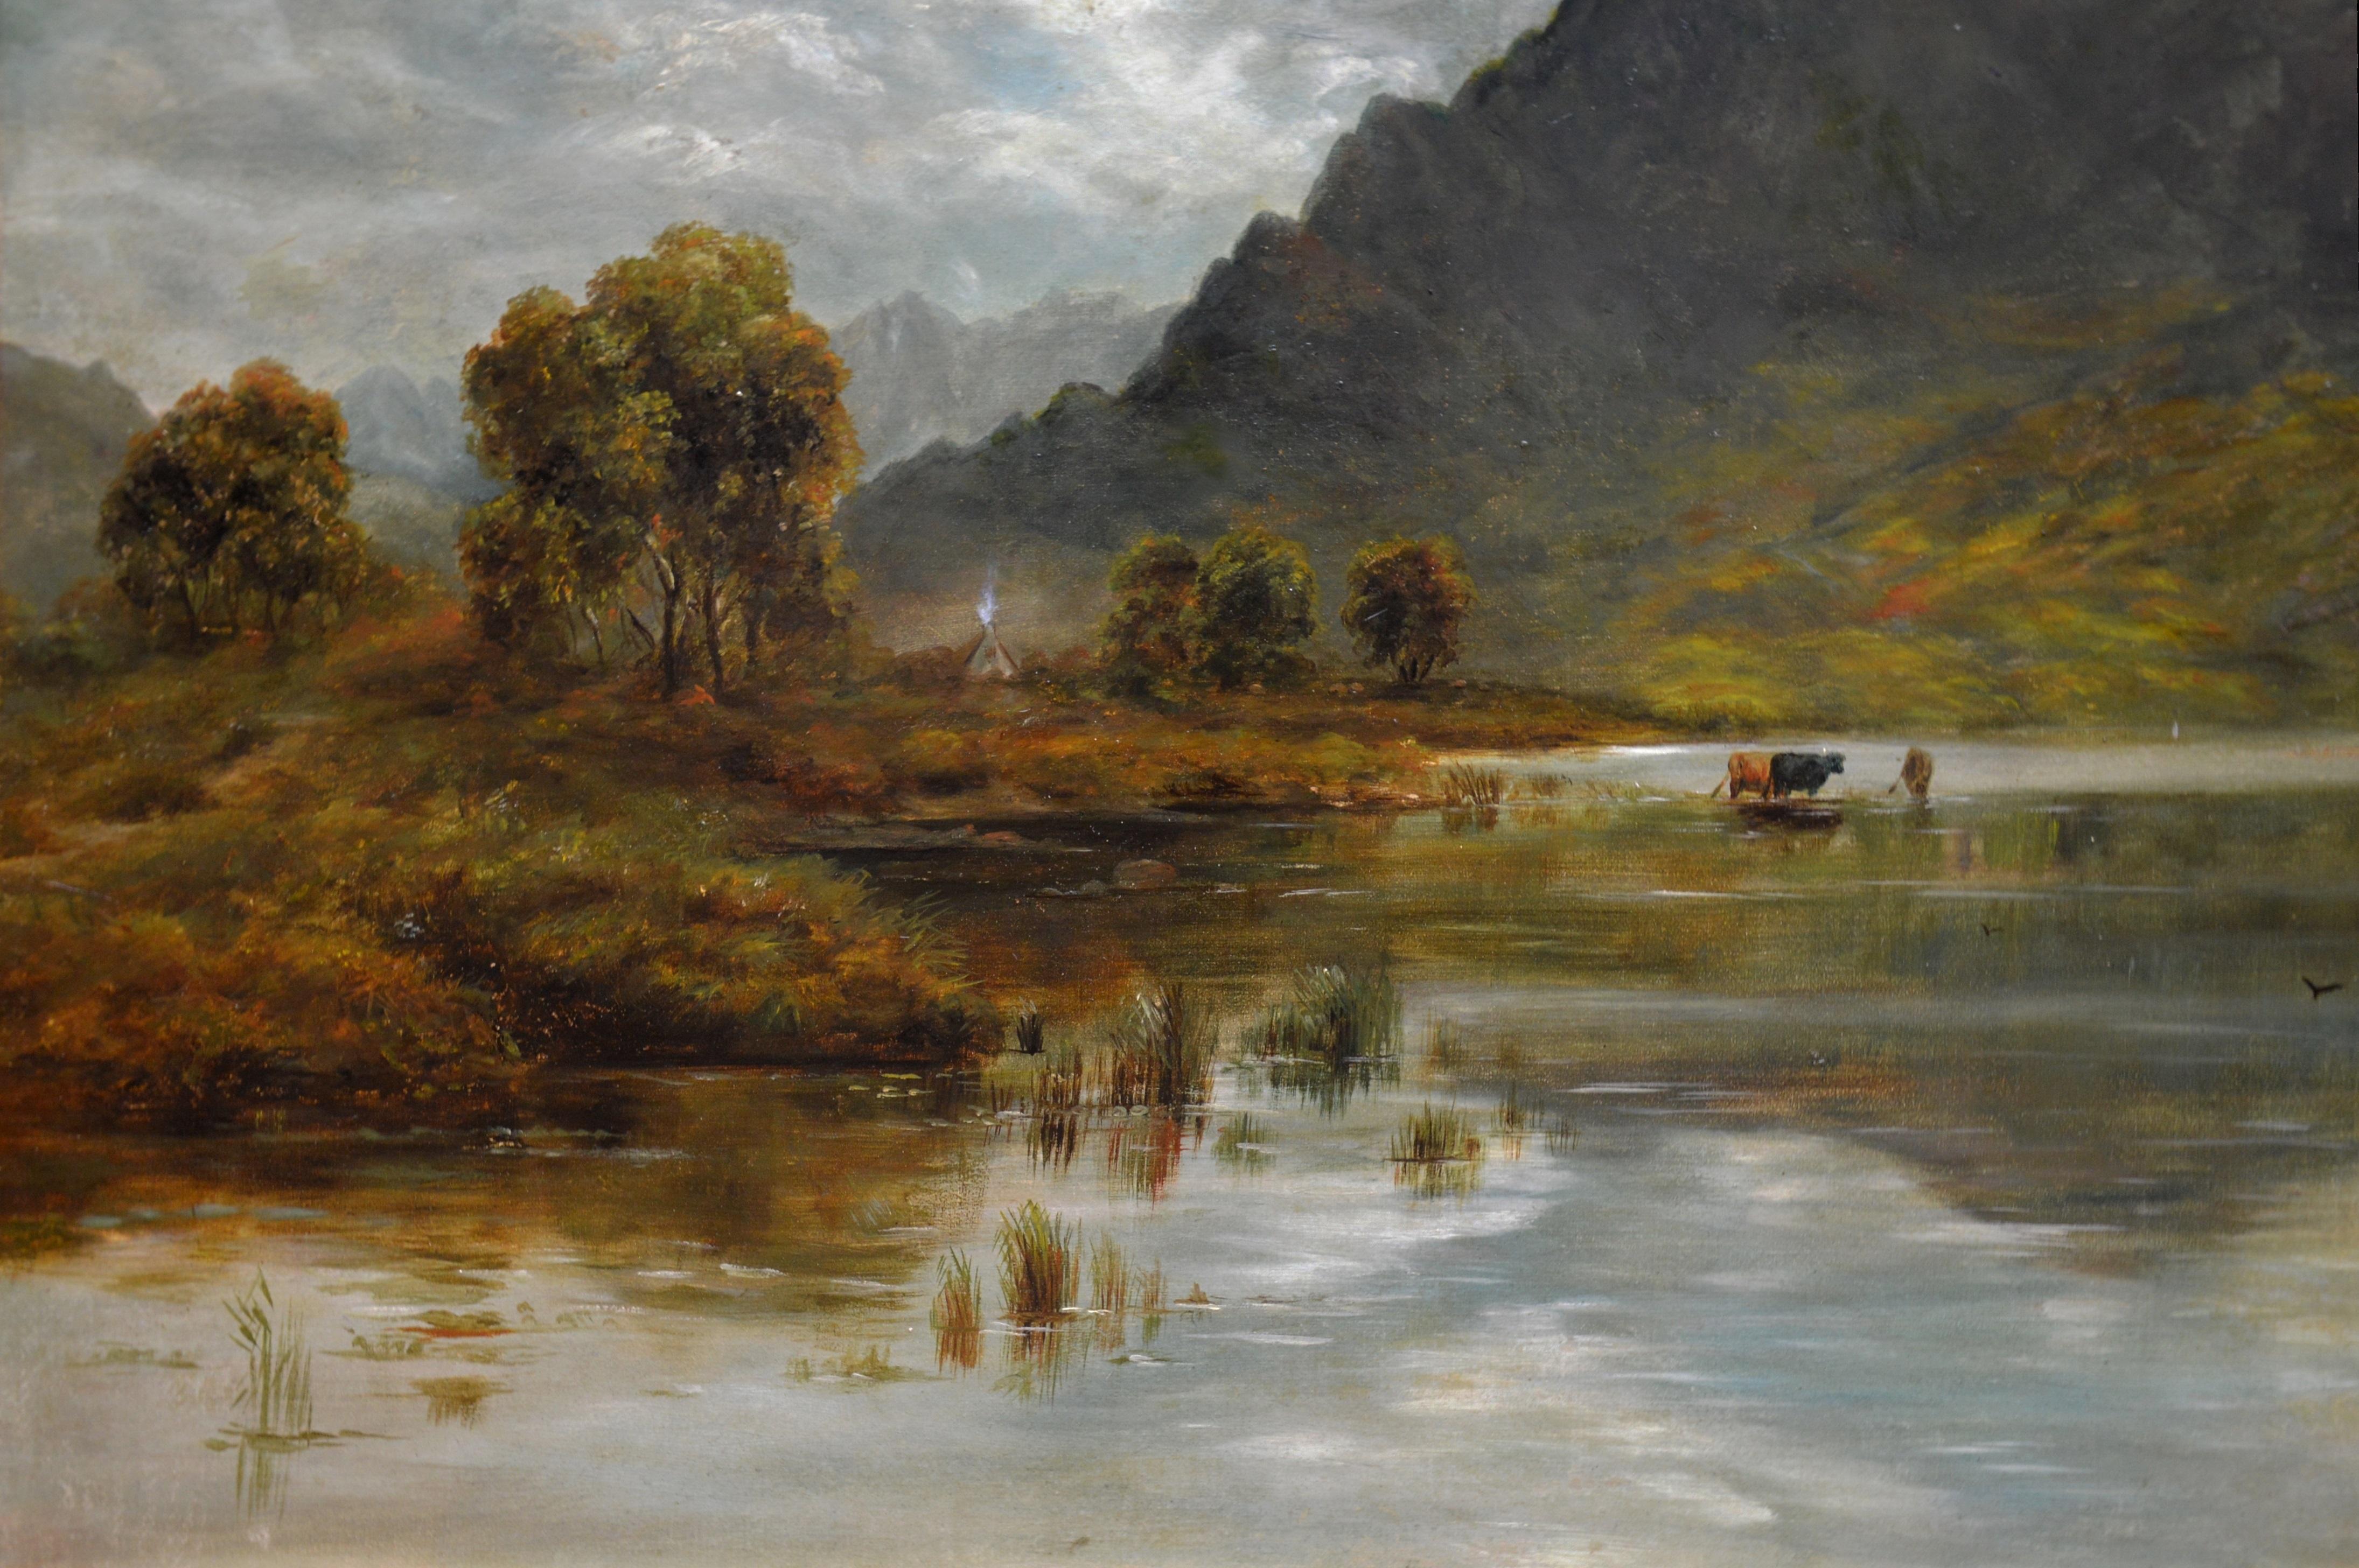 Twilight, Loch Ness - 19th Century Oil Painting Nocturne of Scottish Highlands 2